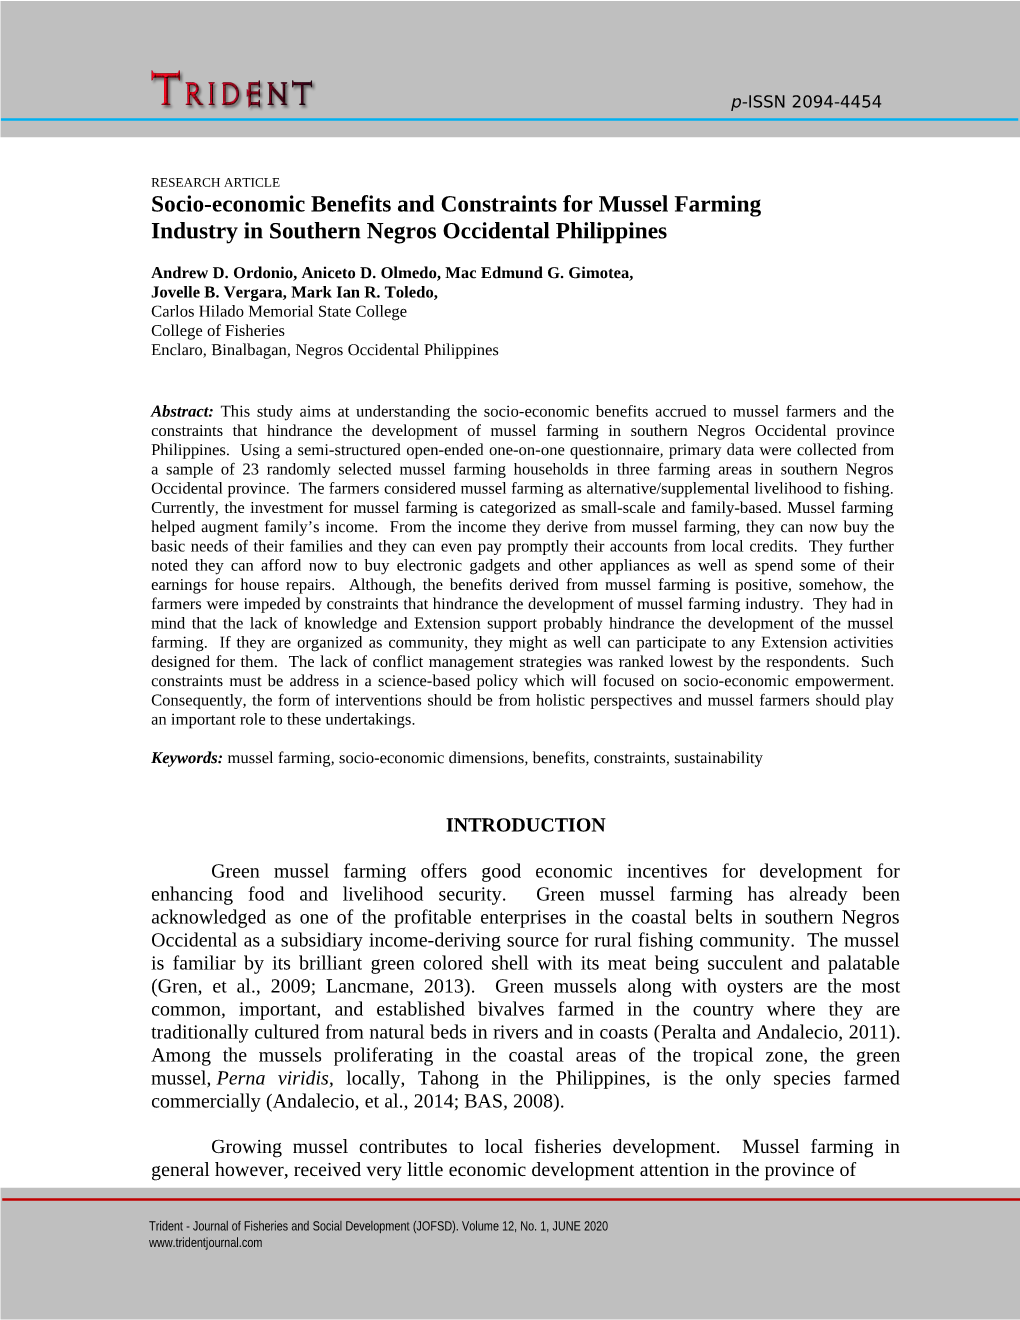 Socio-Economic Benefits and Constraints for Mussel Farming Industry in Southern Negros Occidental Philippines